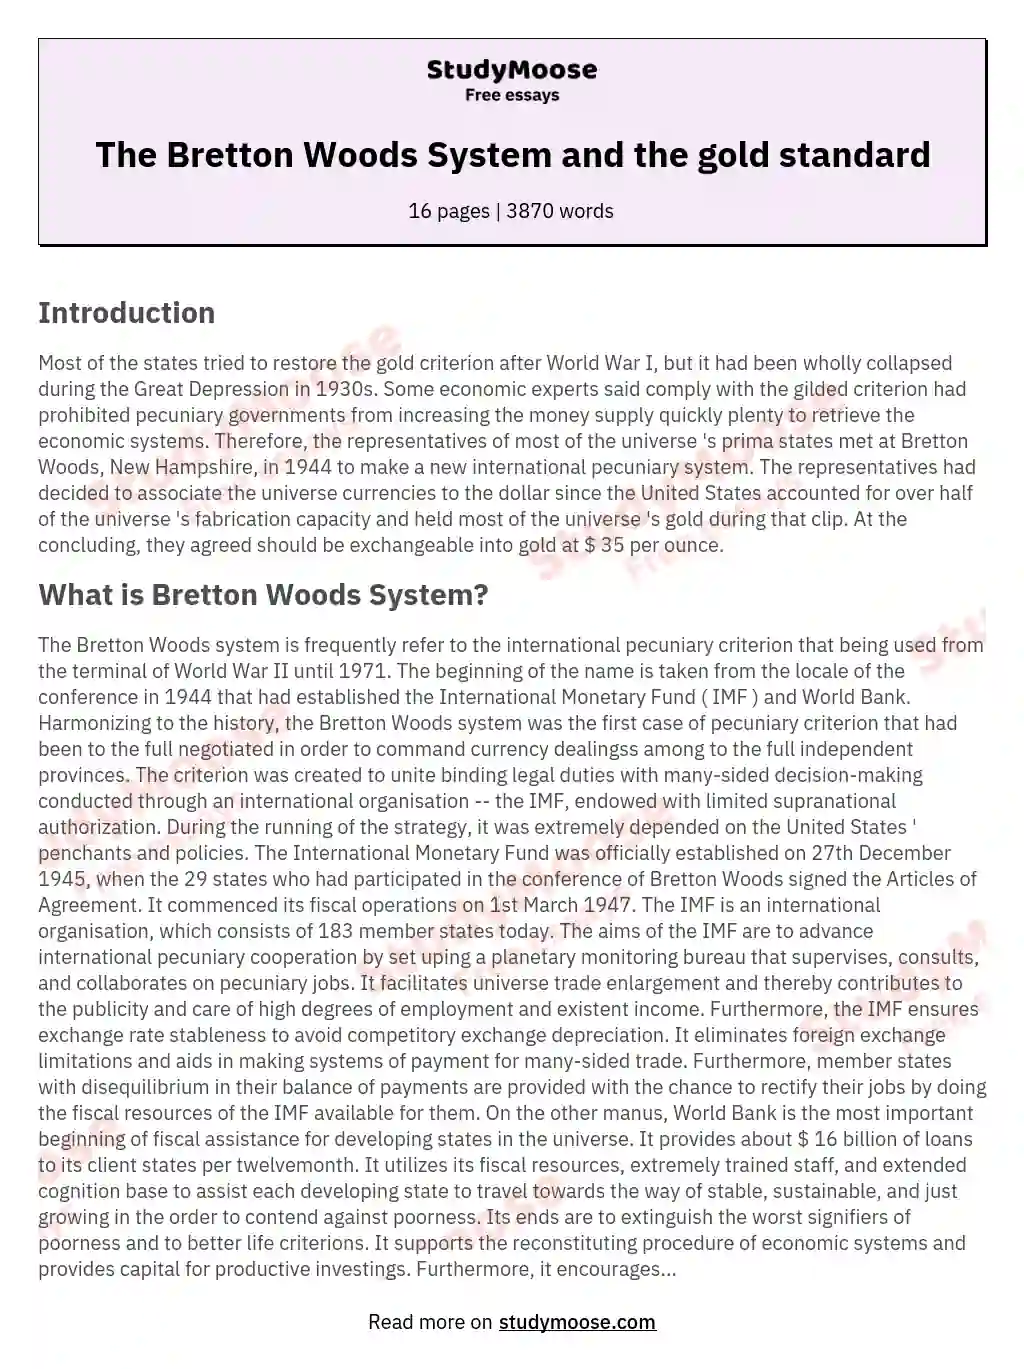 The Bretton Woods System and the gold standard essay